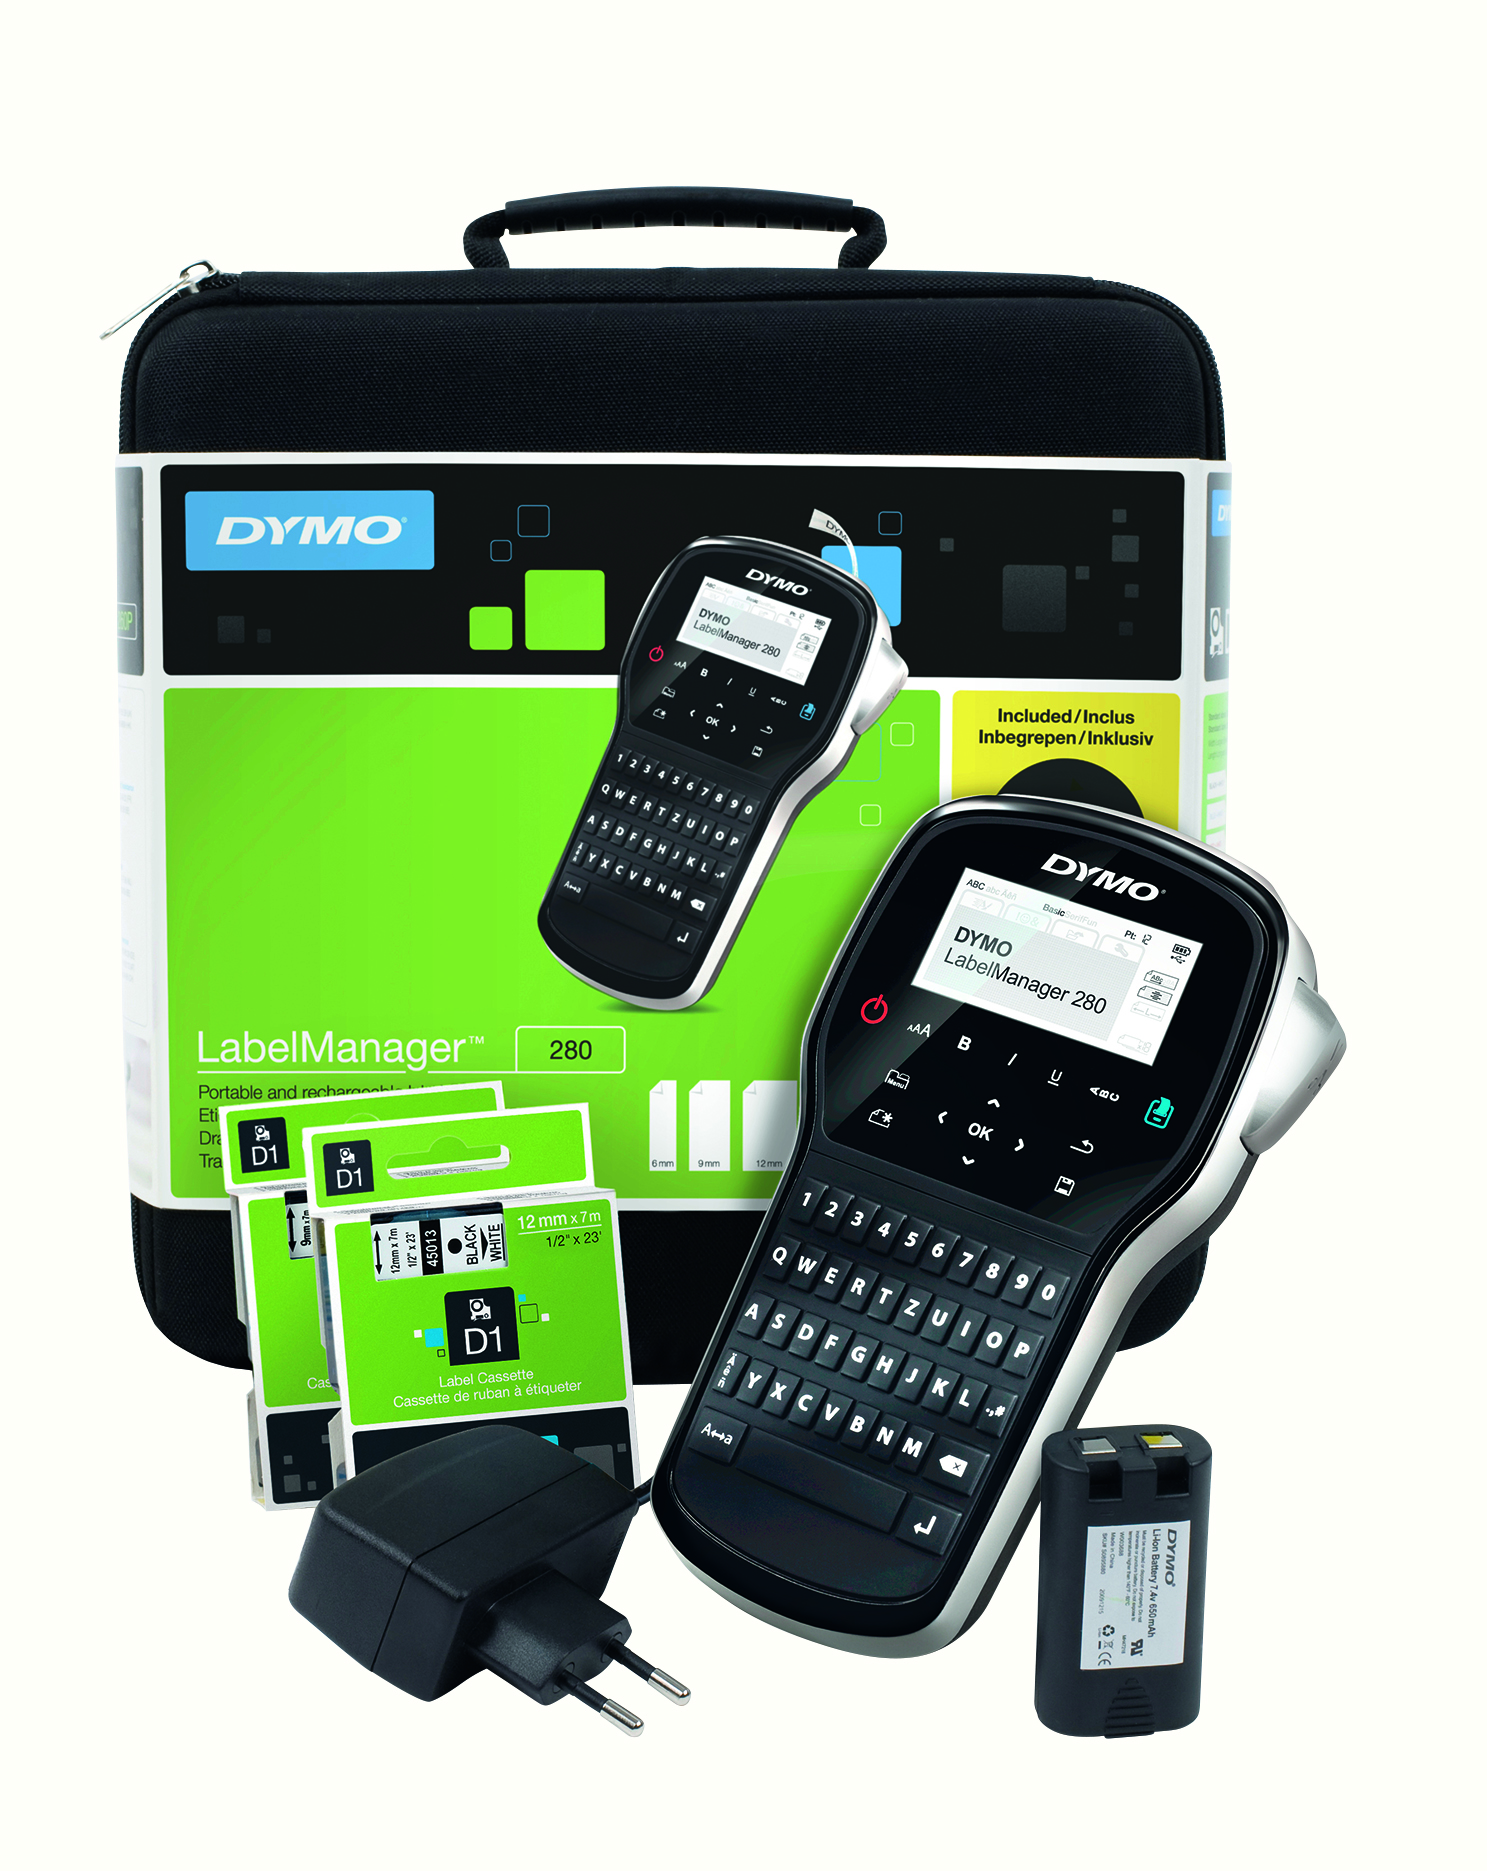 DYMO LabelManager 280 Kit